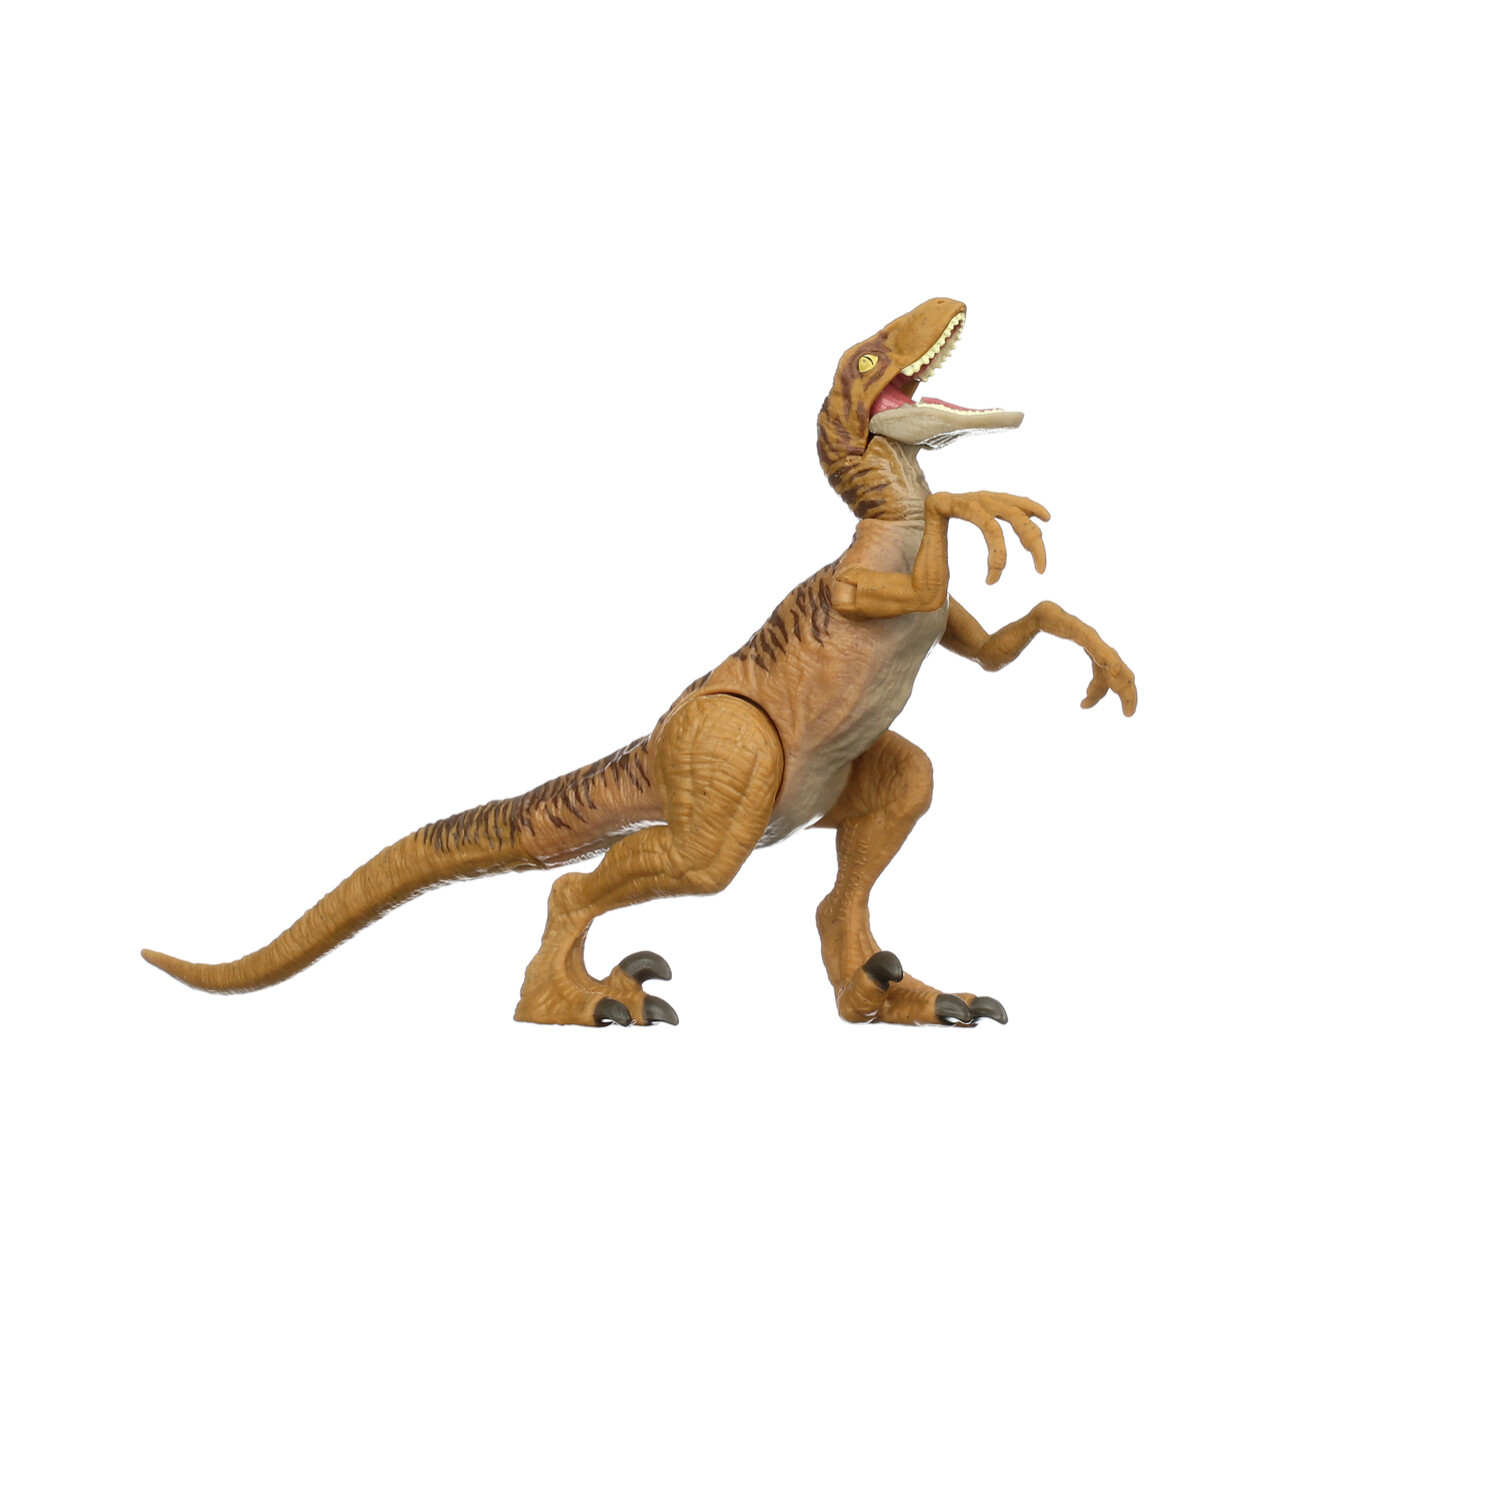 Jurassic World Toys Velociraptor - Jumping Savage Strike Dinosaur Action  Figure, Smaller Size, Attack Move Iconic to Species, Movable Arms & Legs